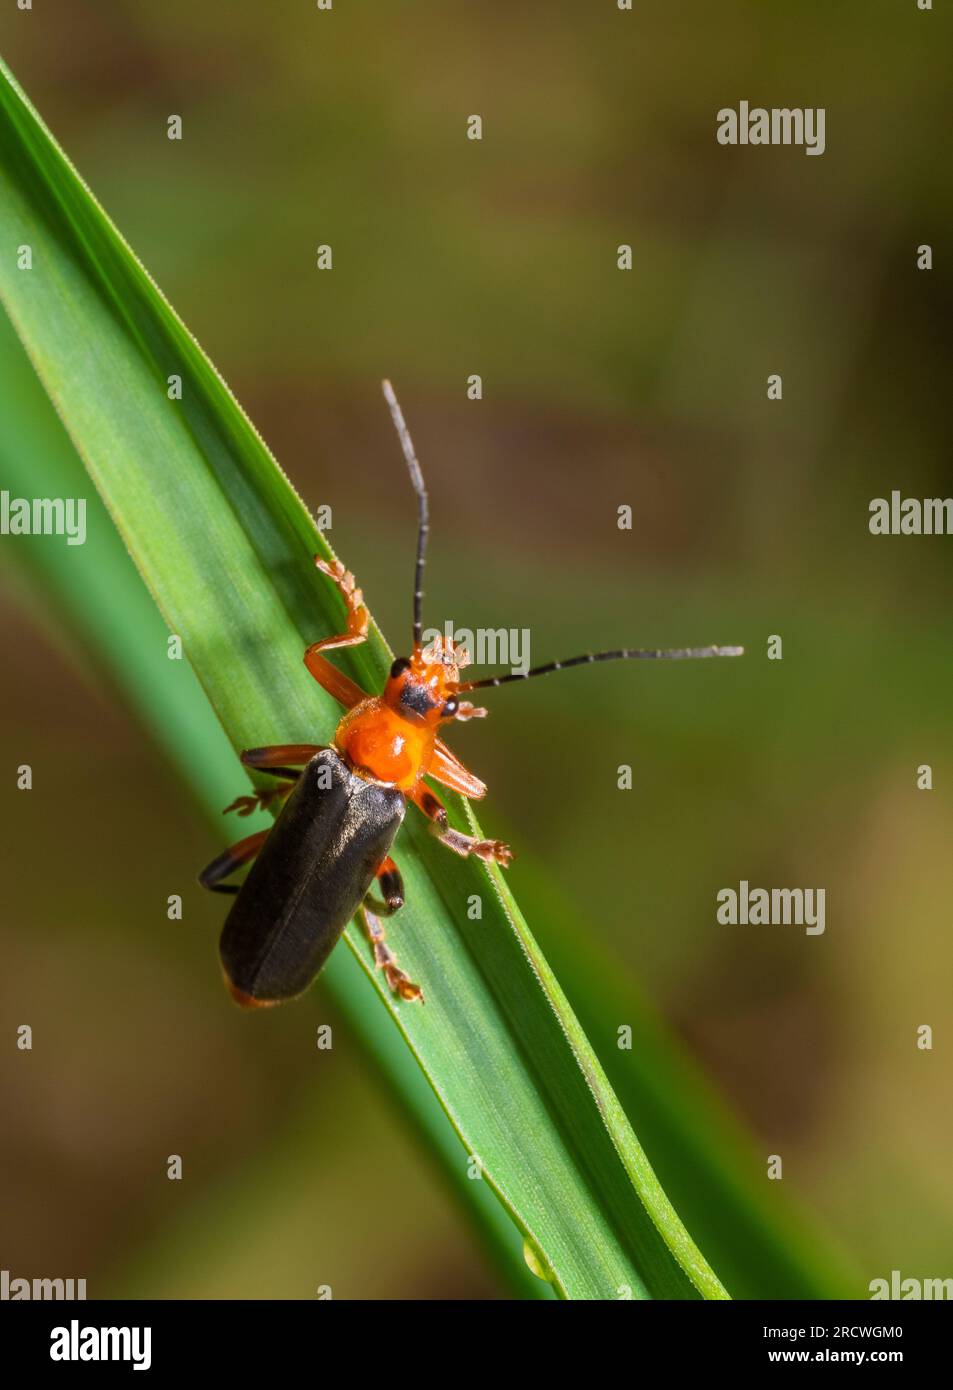 Soldier beetle on green grass leaf in front of blurry back Stock Photo